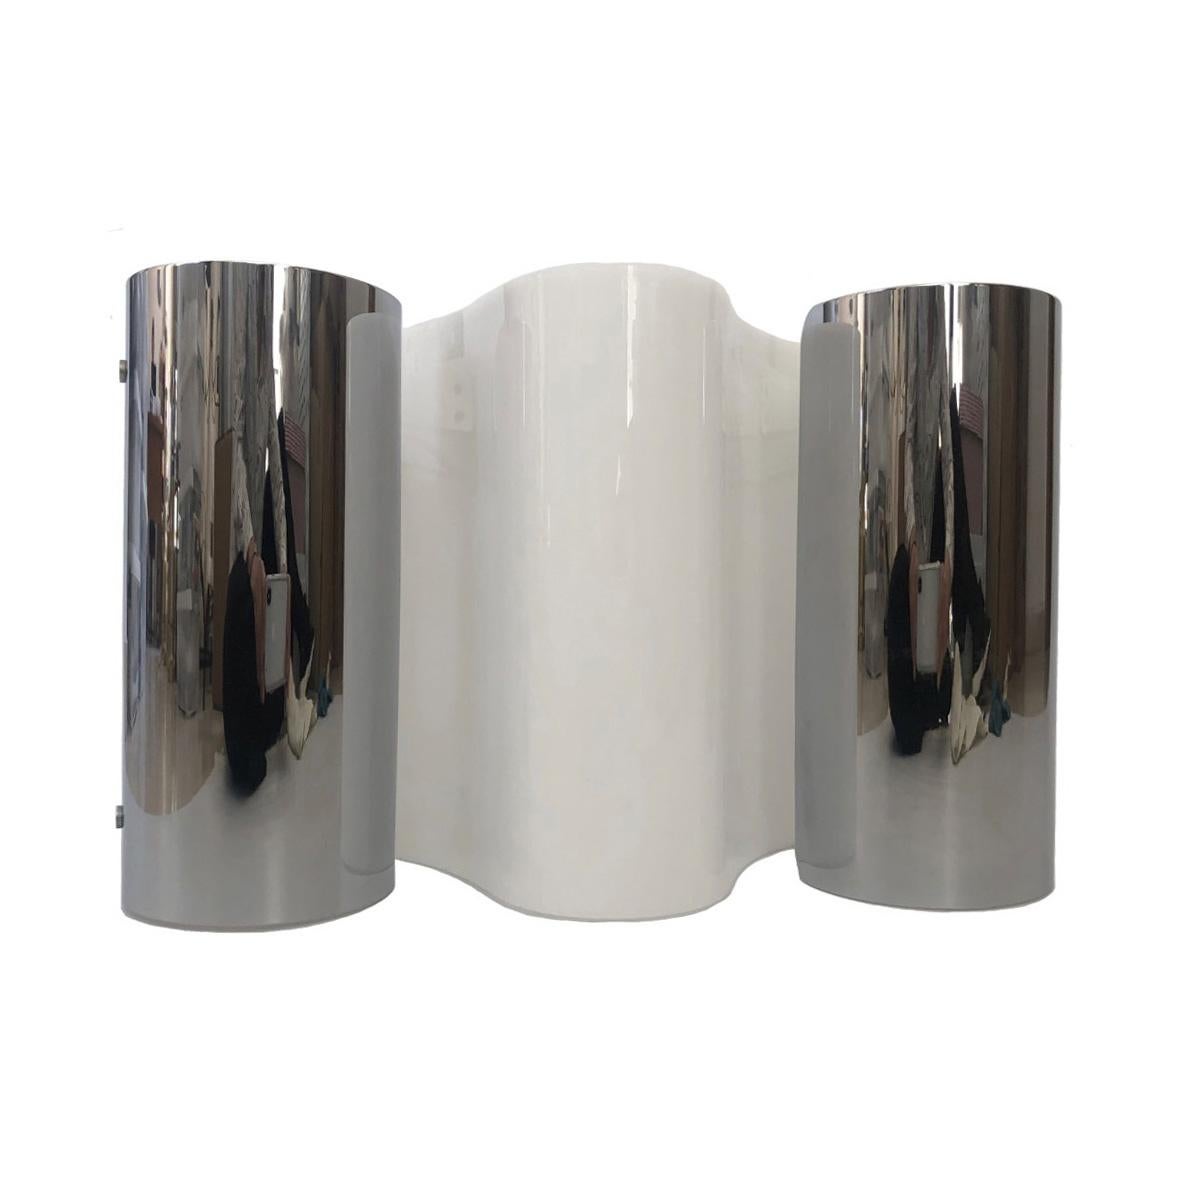 Huge and refined Lucite and chromed metal wall sconce. This wall sconce is made in Barcelona (Spain) by Metalarte during 1980s.
This fixture has embeded behind the brand “metalarte”.
This wall sconce is equipped with 3-light sockets (E14). A